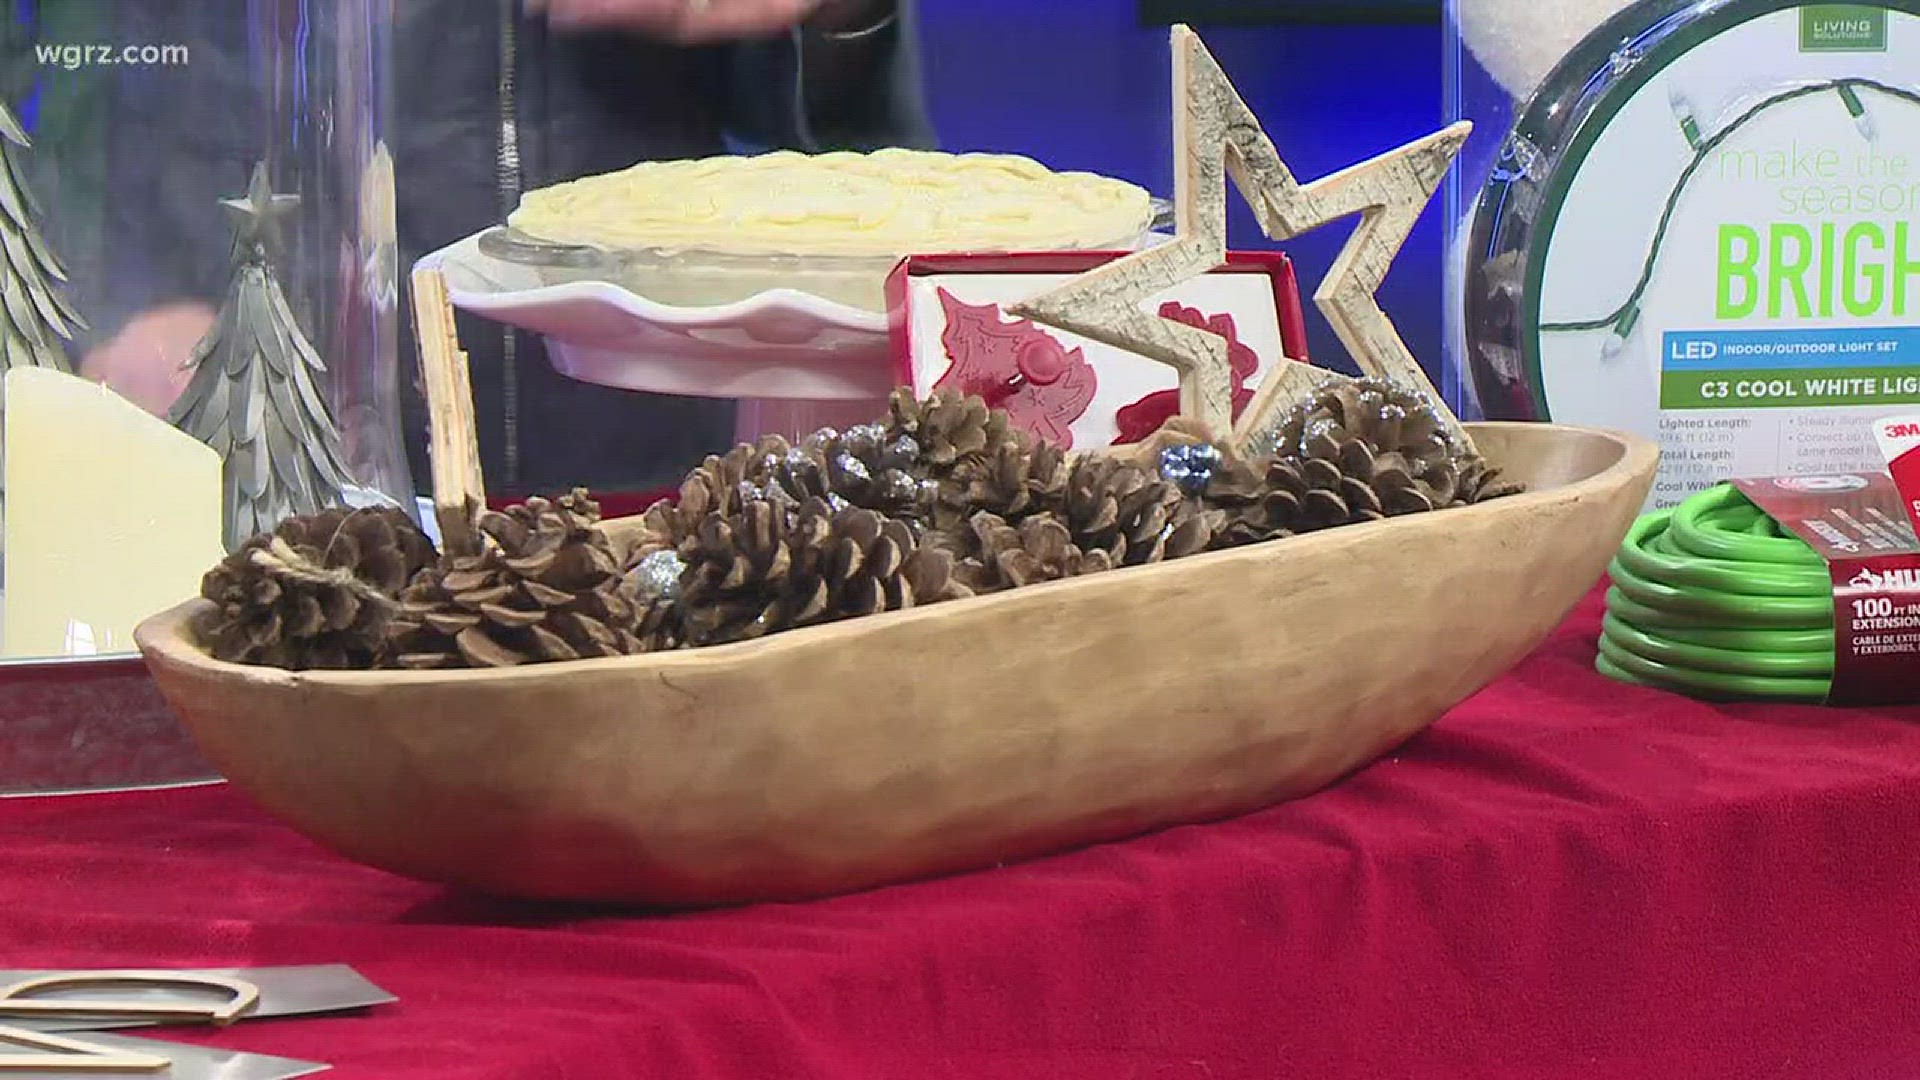 Annette Redican, writer and contributor to Buffalo Magazine, stopped by Daybreak to share some easy, inexpensive ways to make your home and gifts more festive.